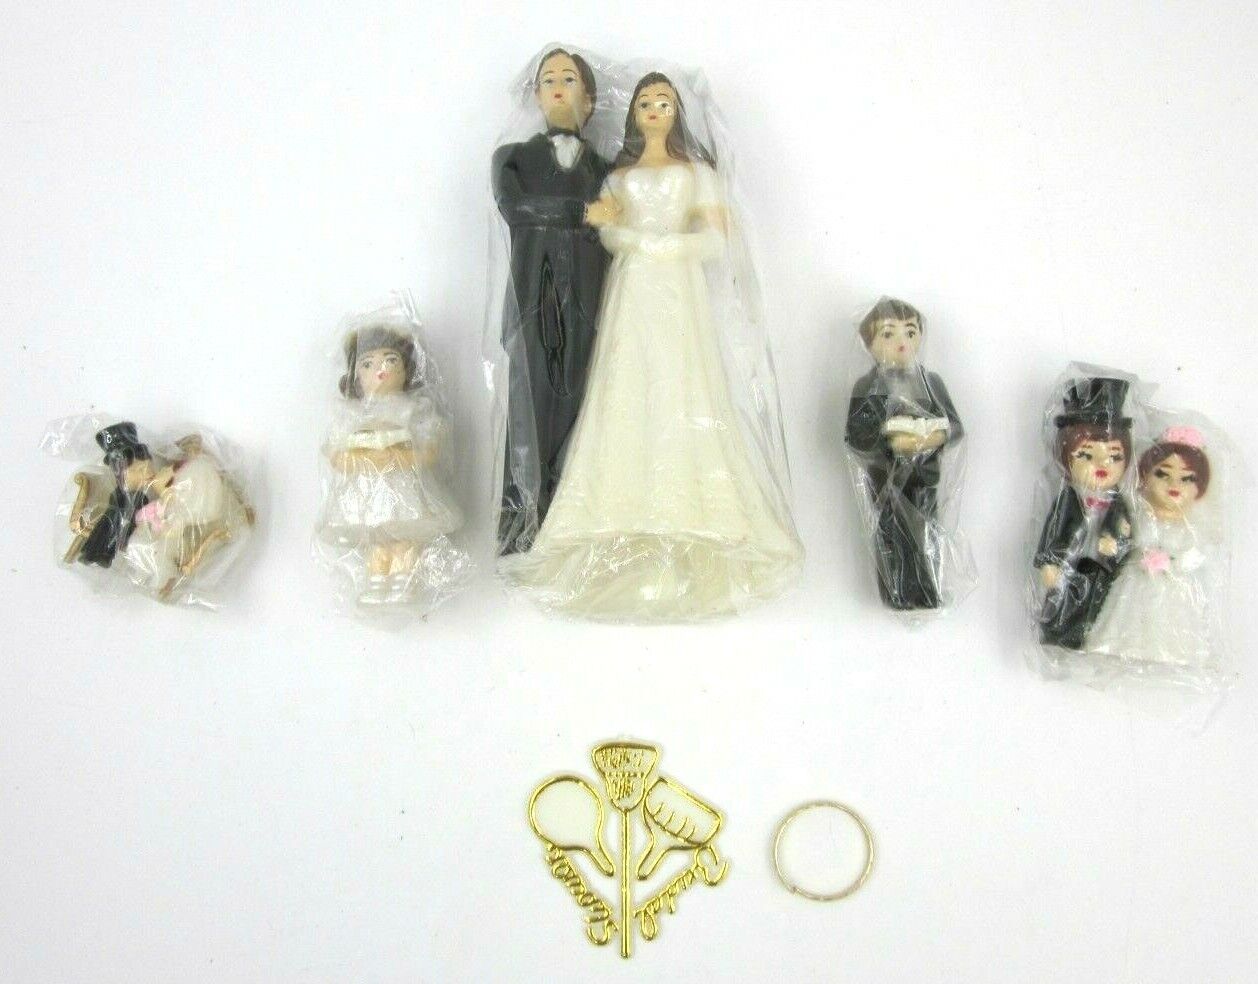 Vintage Bride and Groom Cake Topper set for Wedding cakes 7 items per pack Unbranded